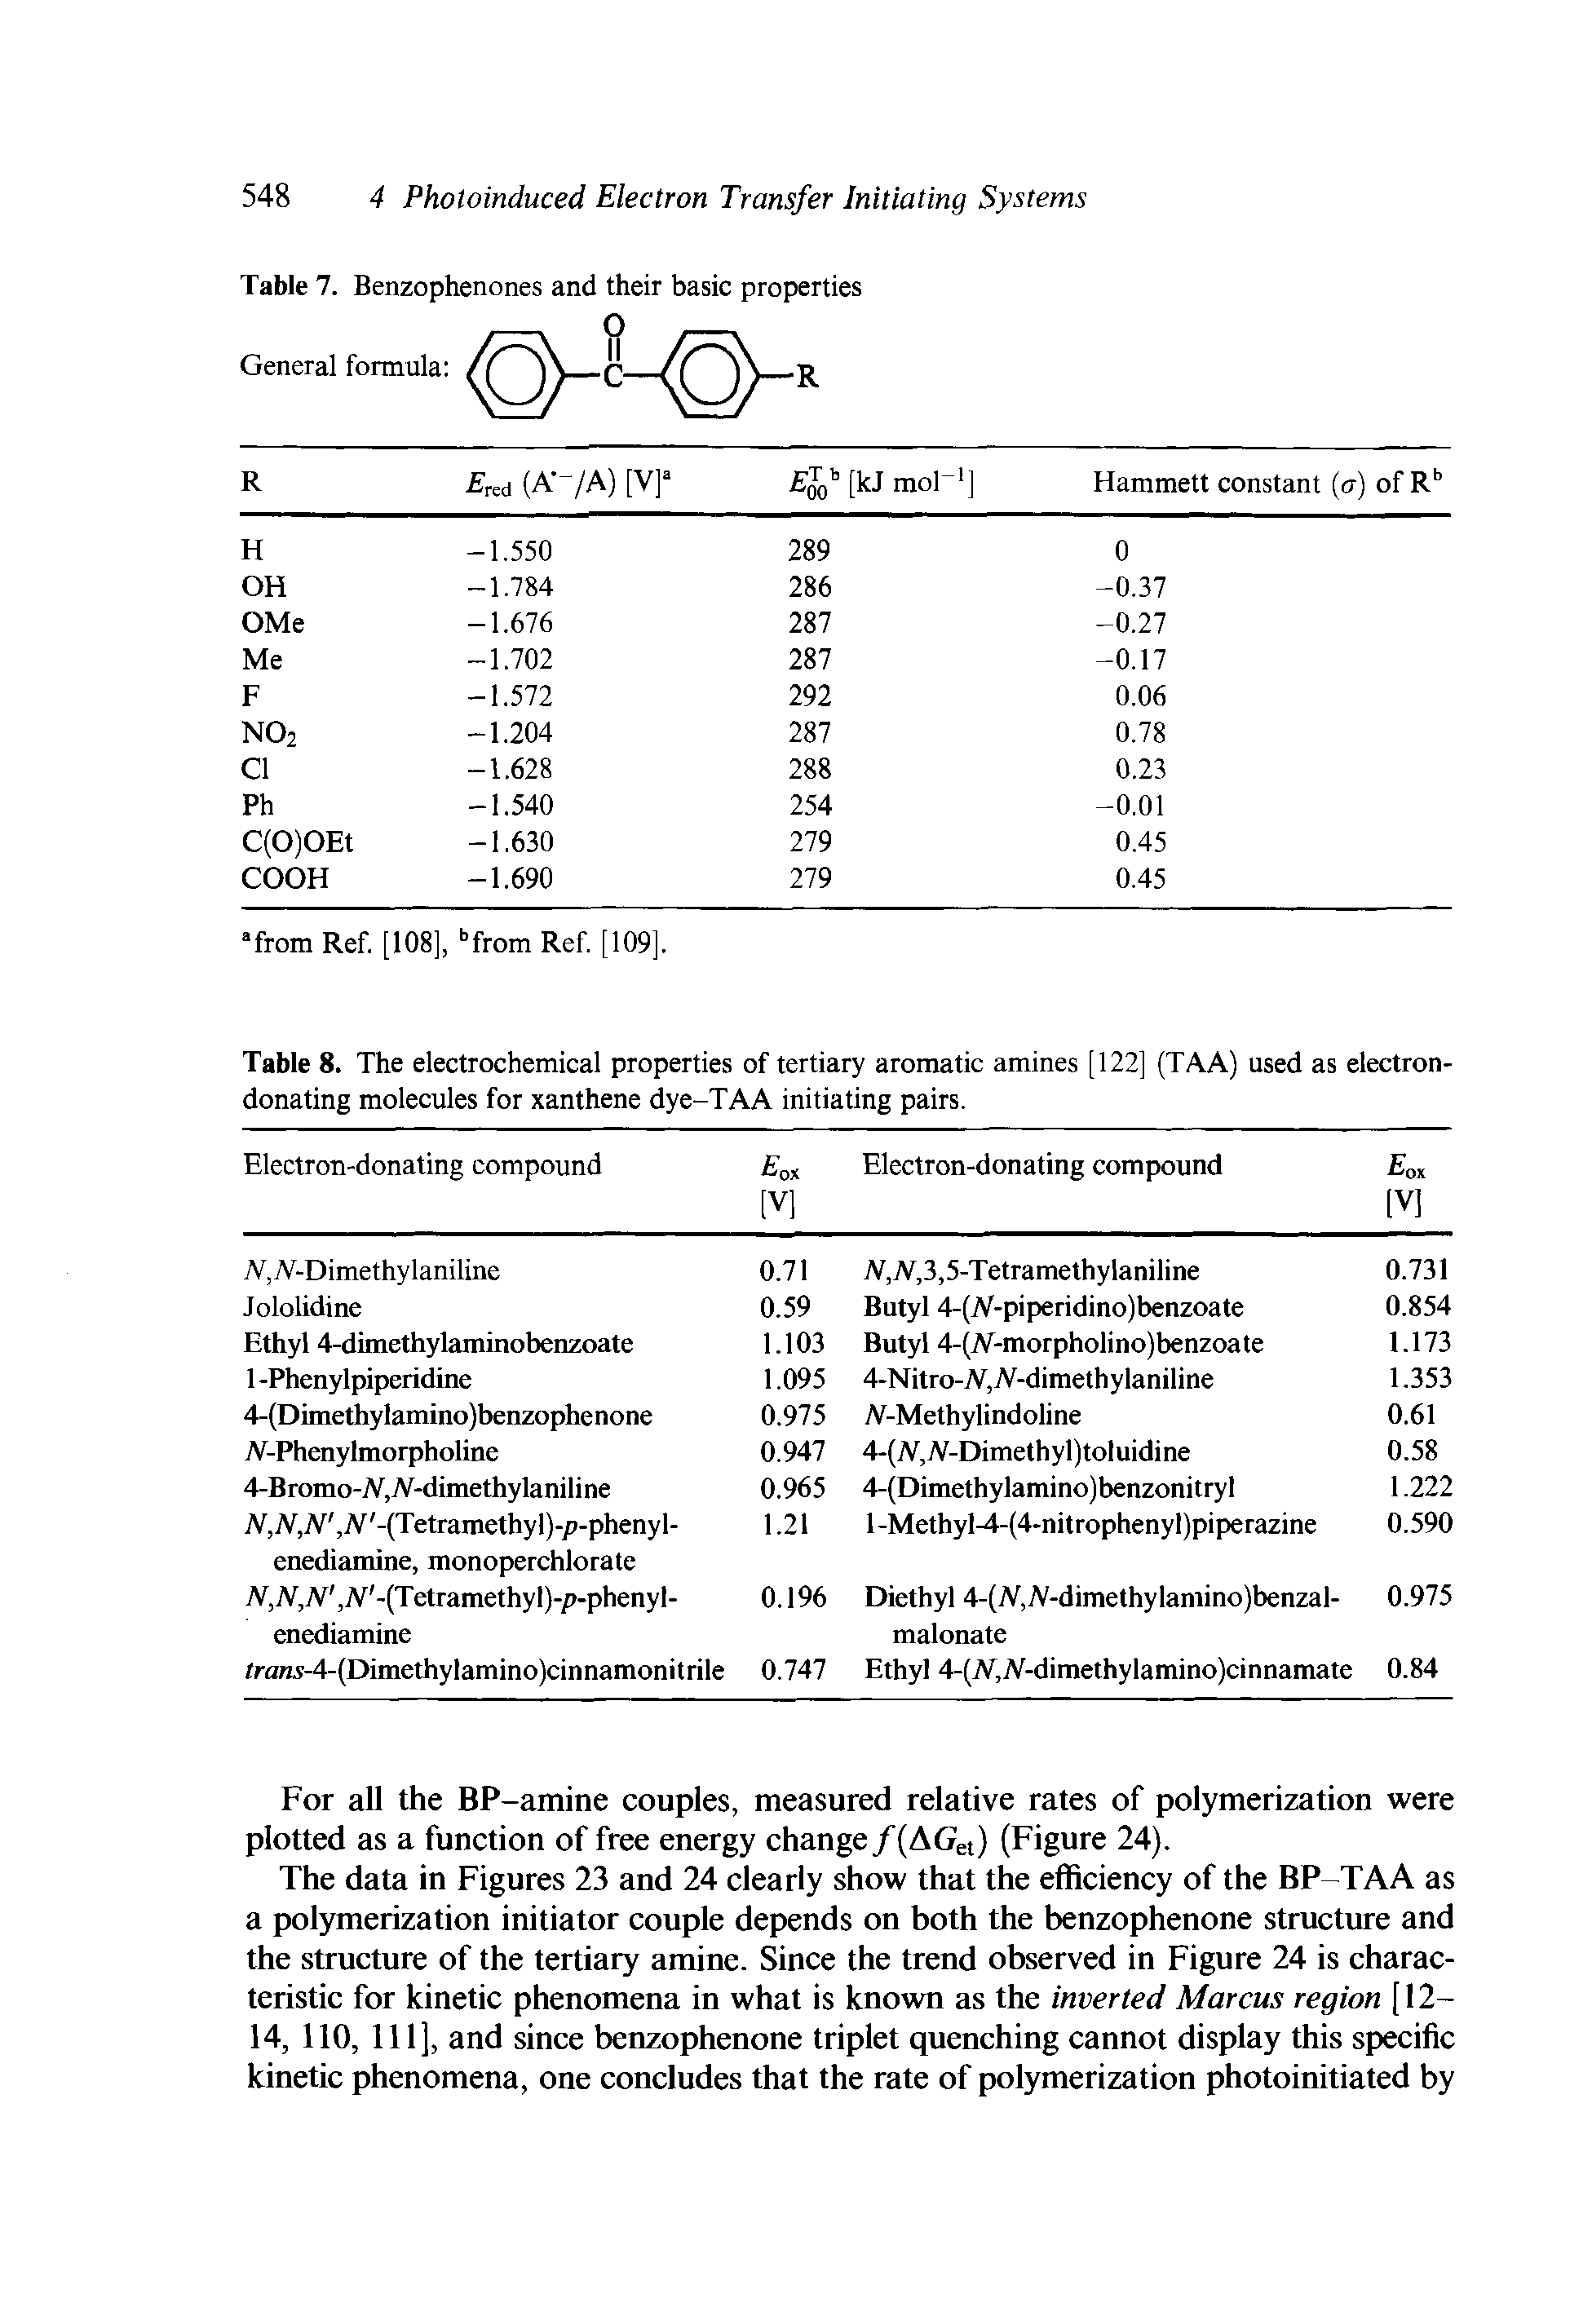 Table 8. The electrochemical properties of tertiary aromatic amines [122] (TAA) used as electron-donating molecules for xanthene dye-TAA initiating pairs.